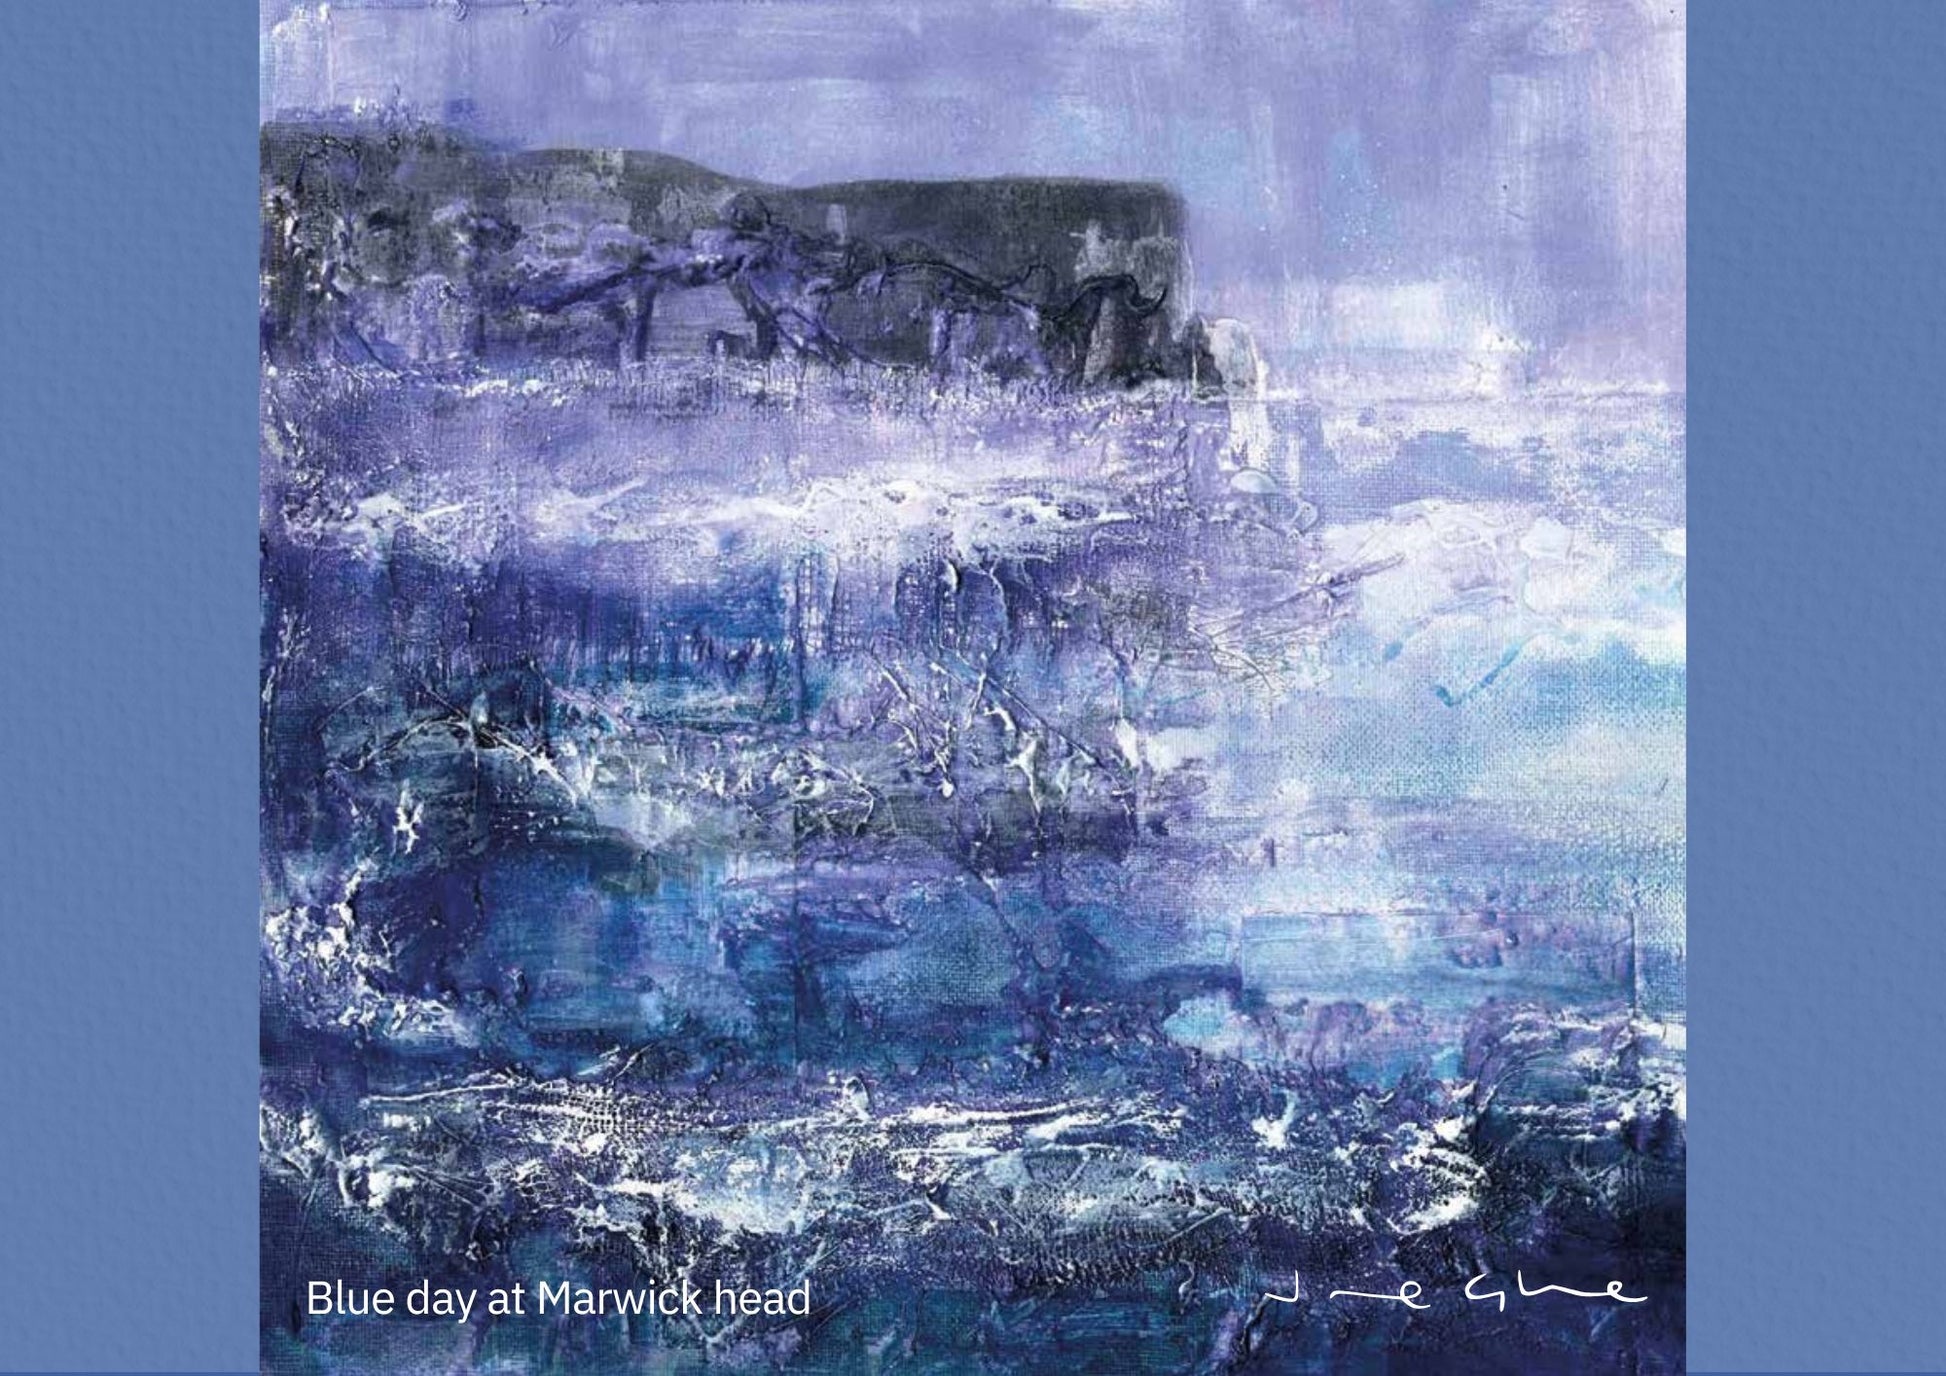 Orkney calendar 2025 November page with mixed media painting of a blue day at Marwick head with wild sea and cliffs by Orkney artist Jane Glue